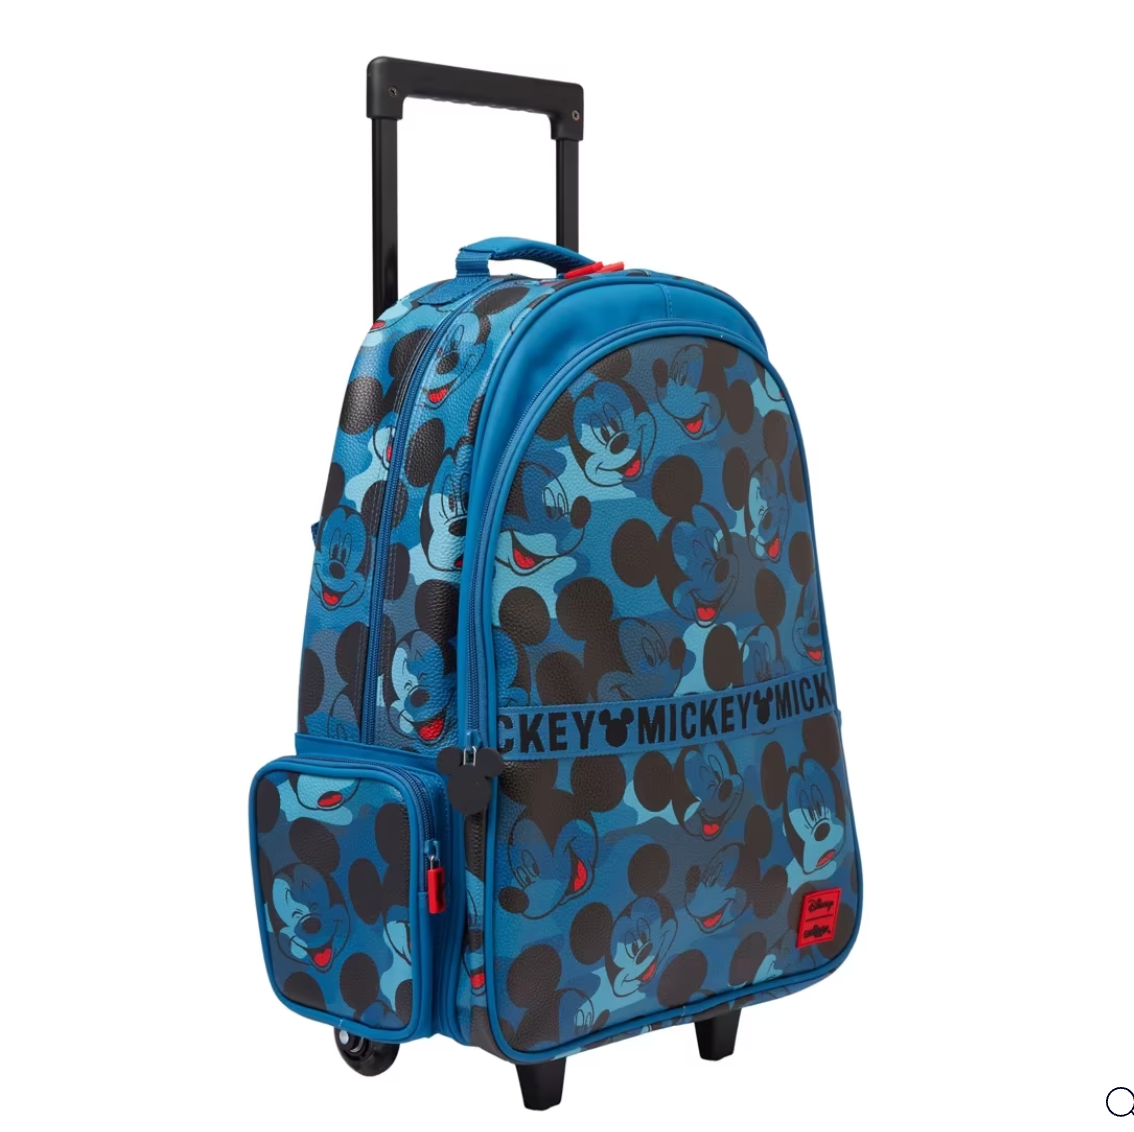 Smiggle Mickey Mouse Trolley Bag With Light Up Wheels - Blue